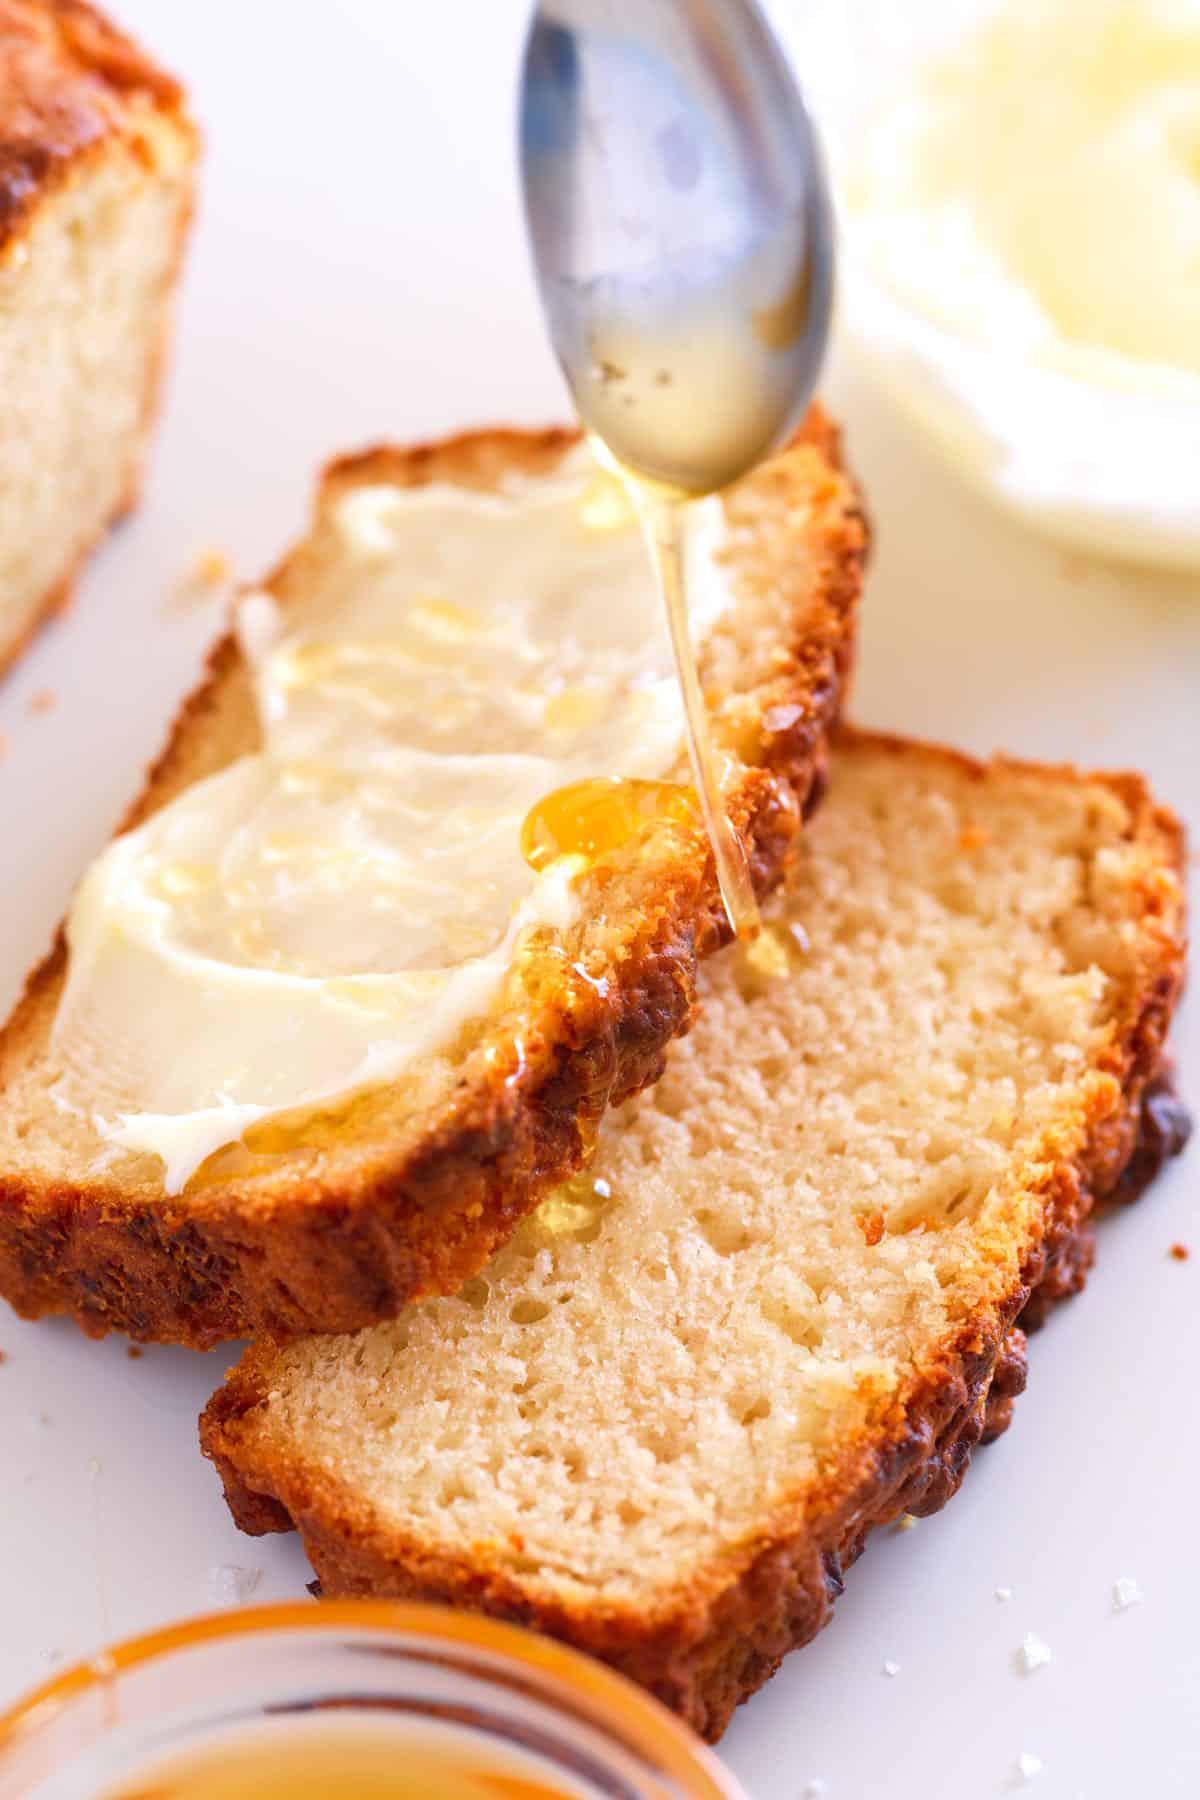 Slices of homemade beer bread with butter and honey